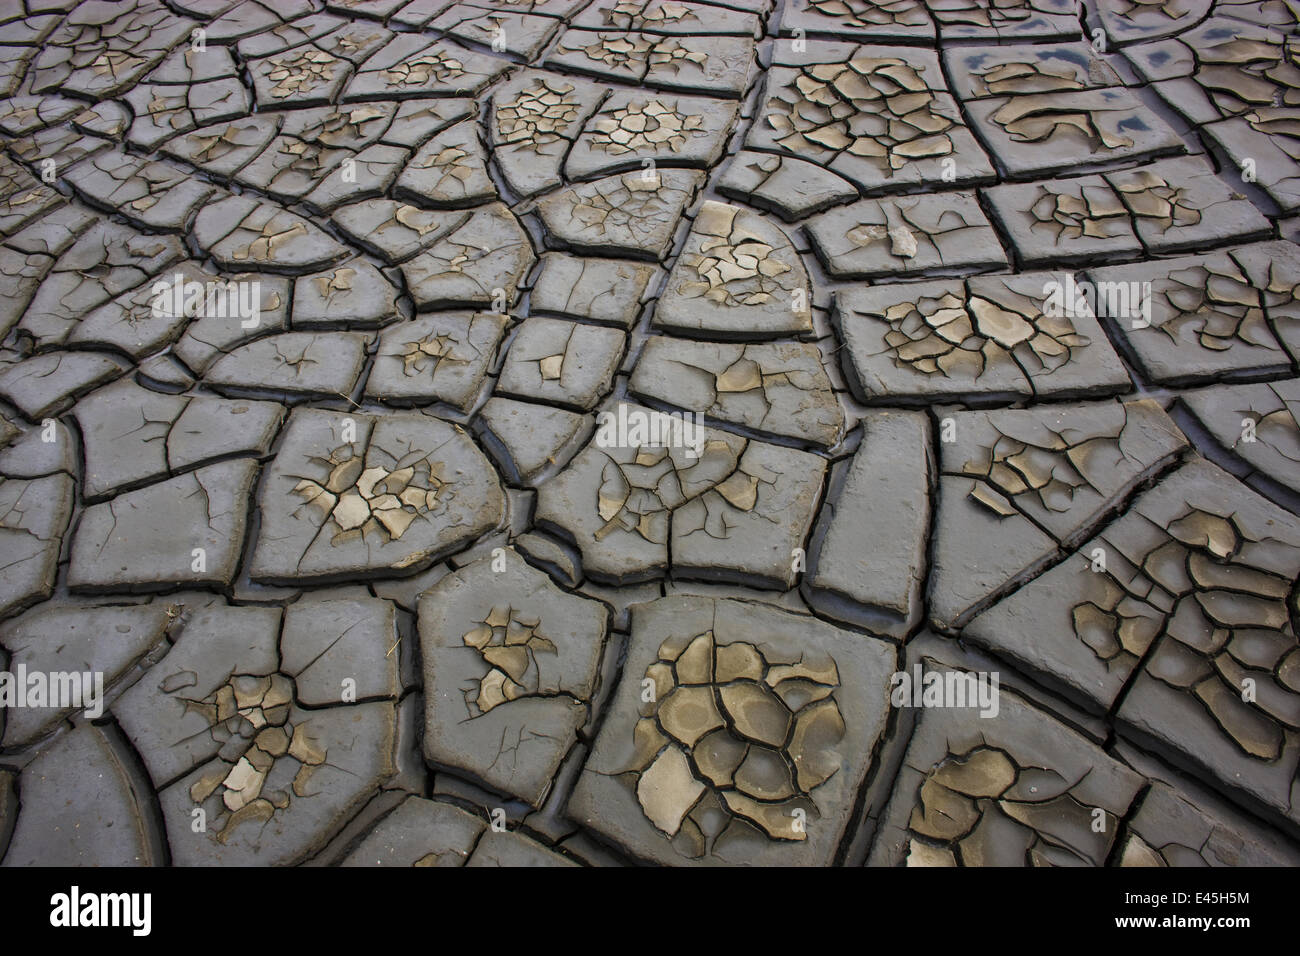 Drought patterns in muddy soil, Camargue, France, May 2009 Stock Photo